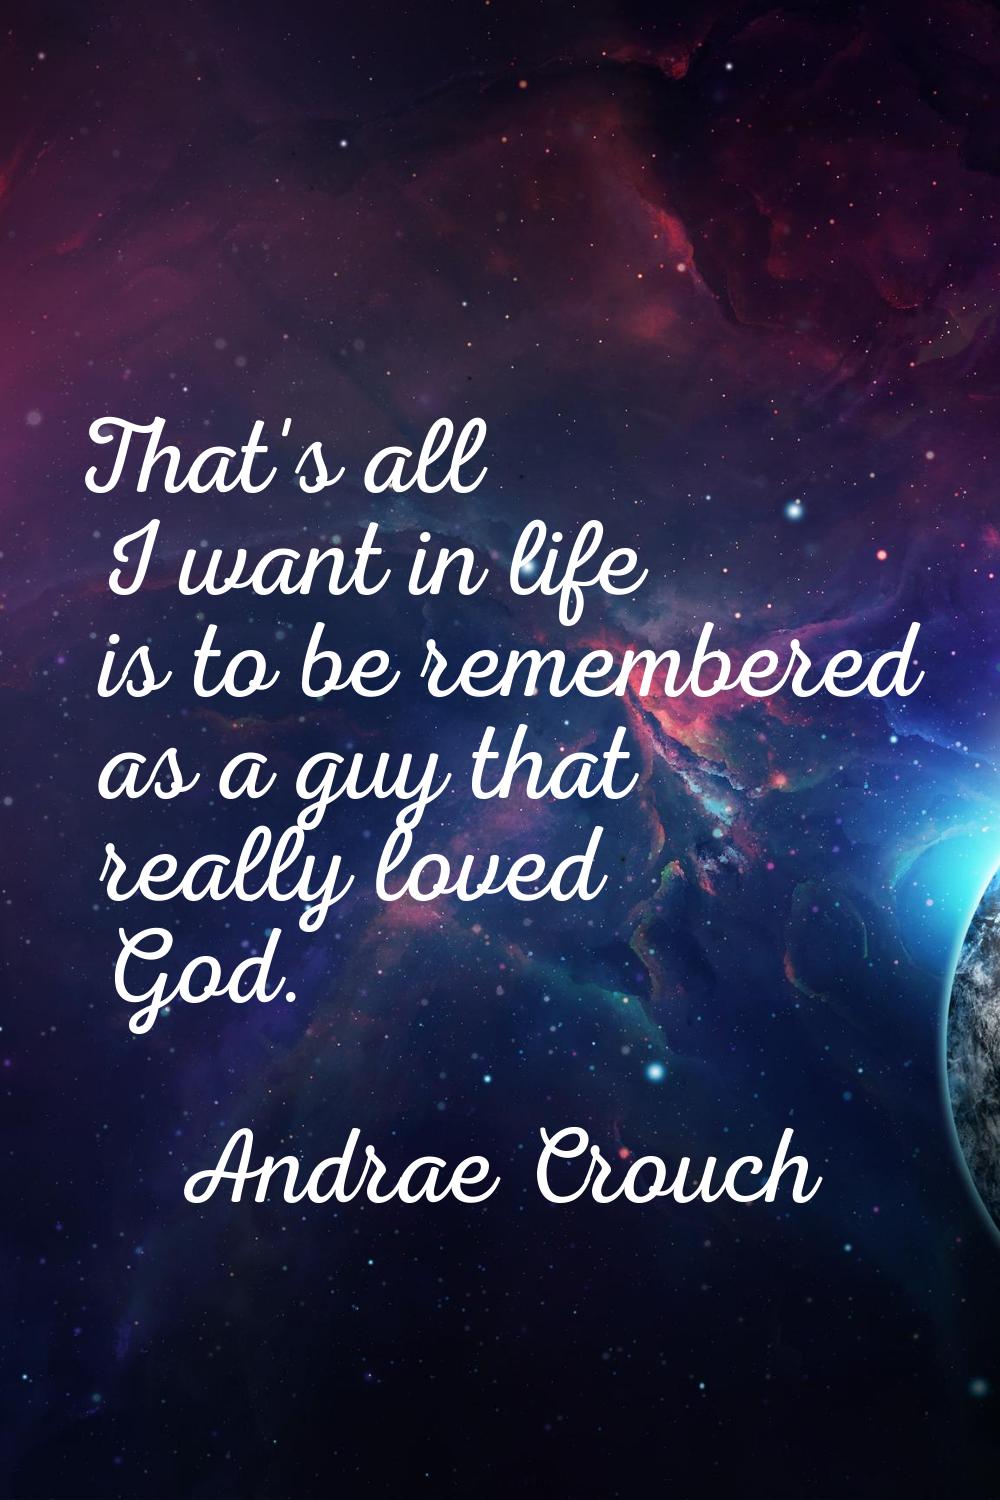 That's all I want in life is to be remembered as a guy that really loved God.